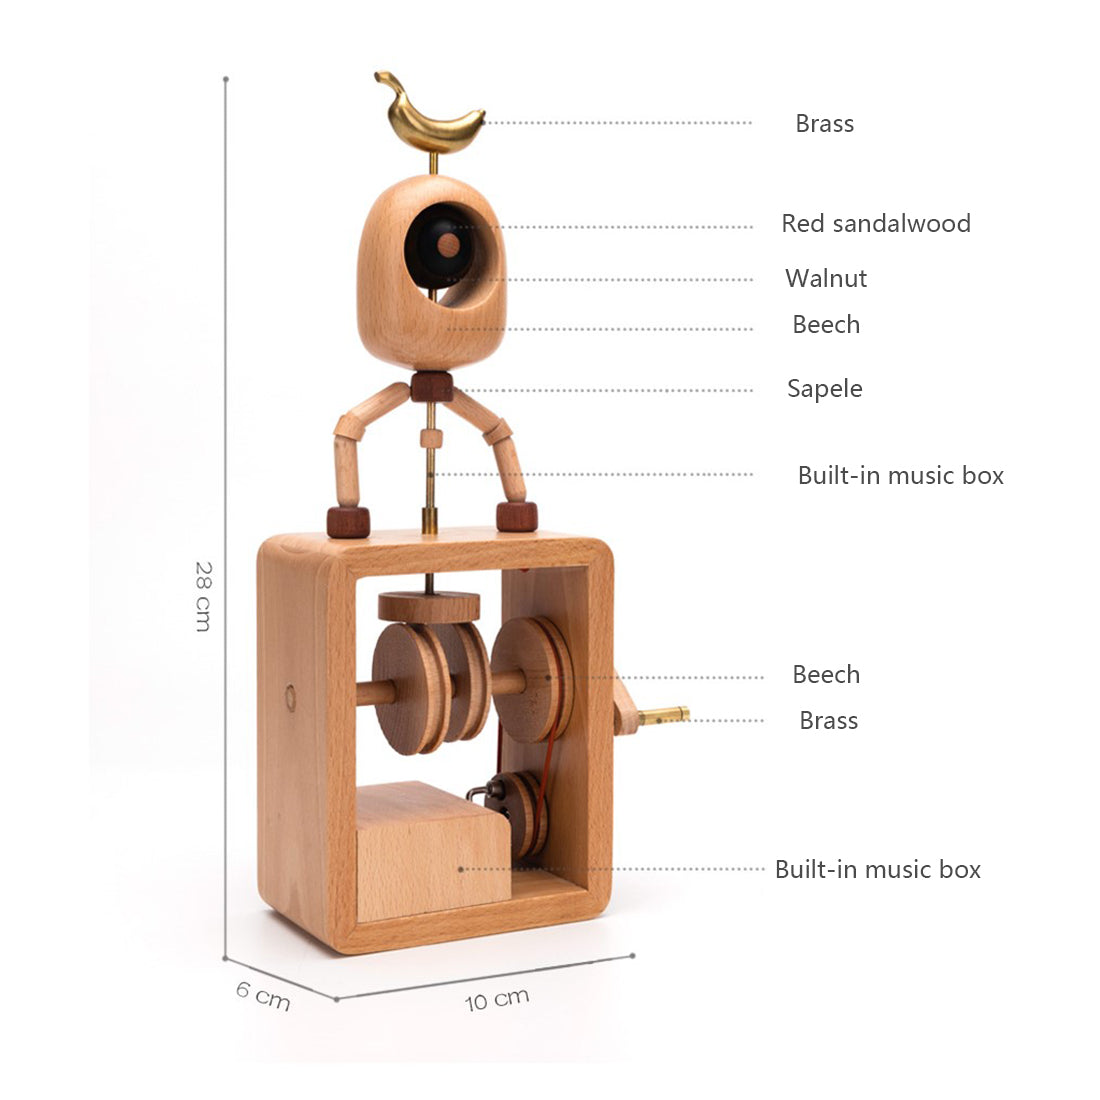 Hand-cranked music box in illustrated cardboard made by Belle